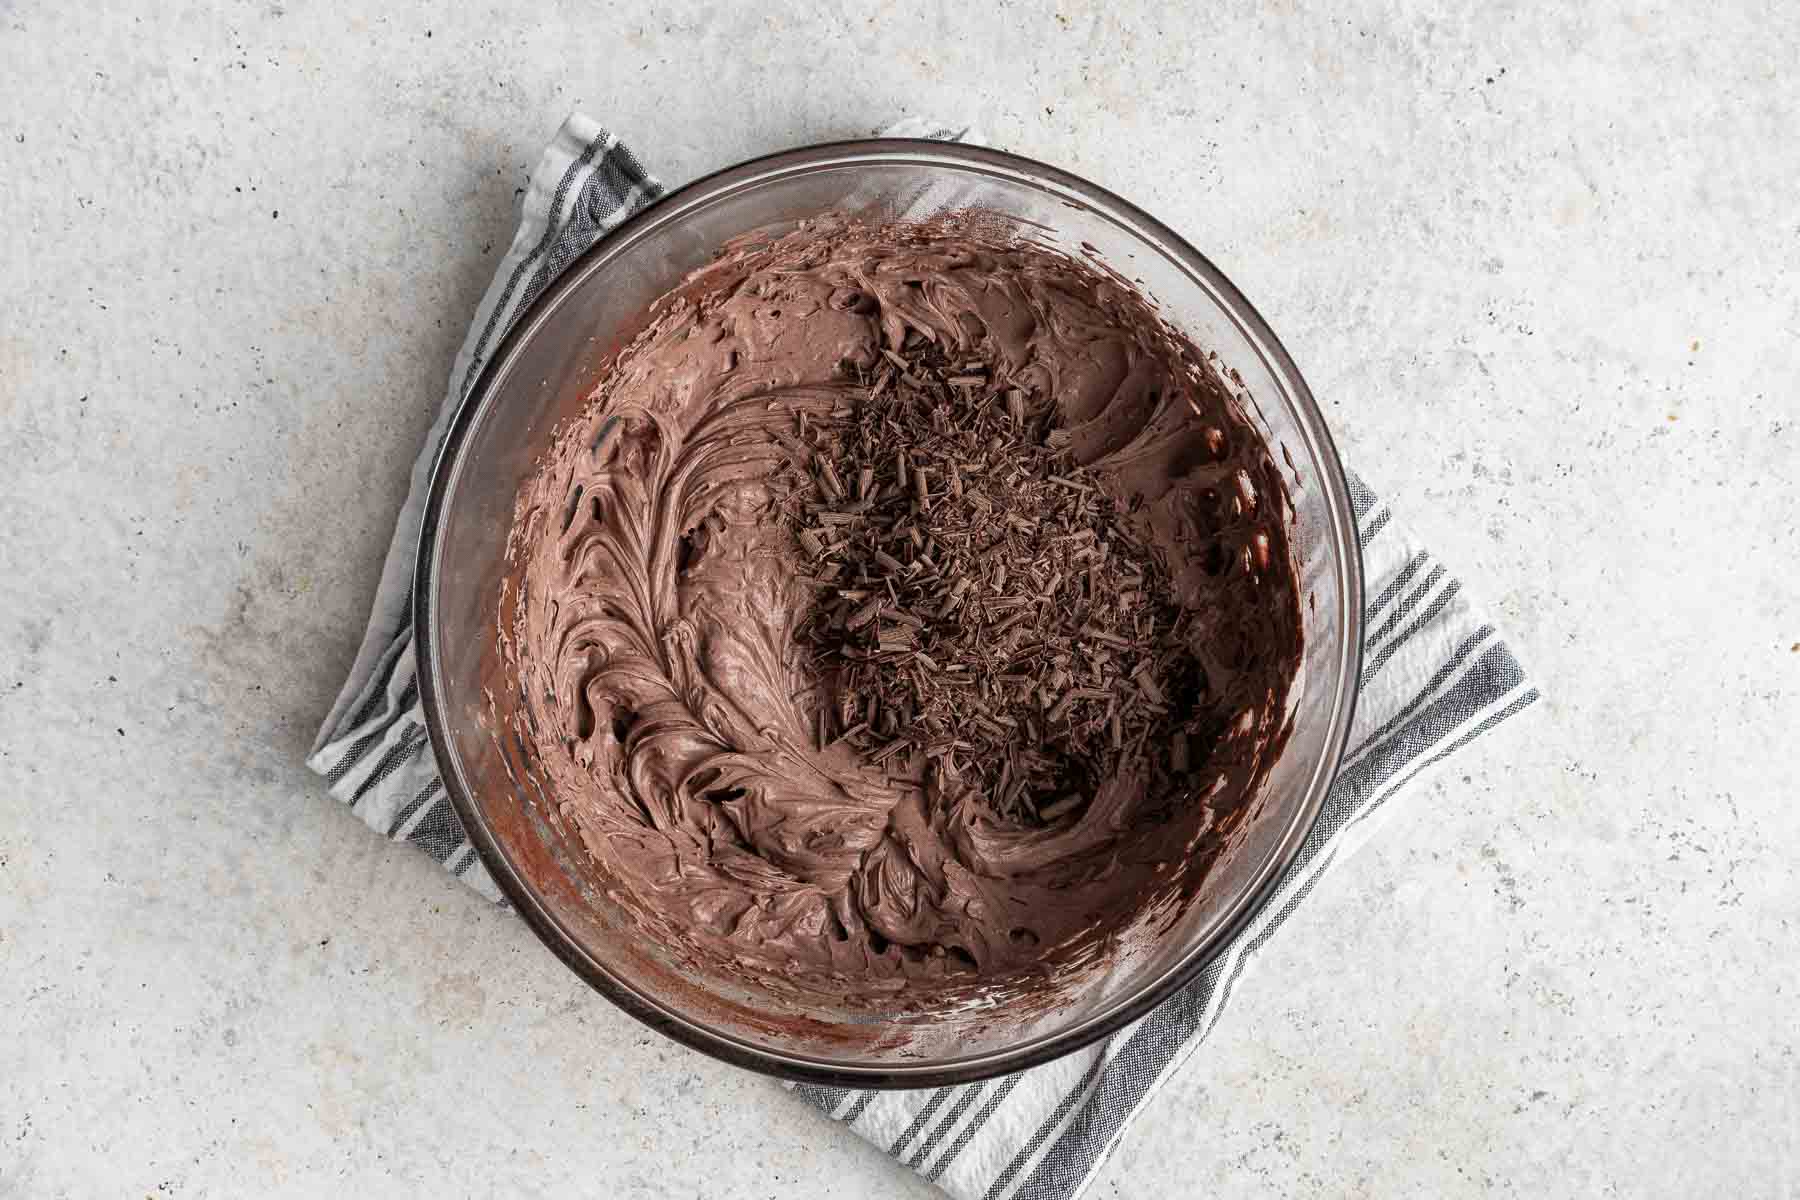 Chocolate shavings on a bowl of whipped cream.